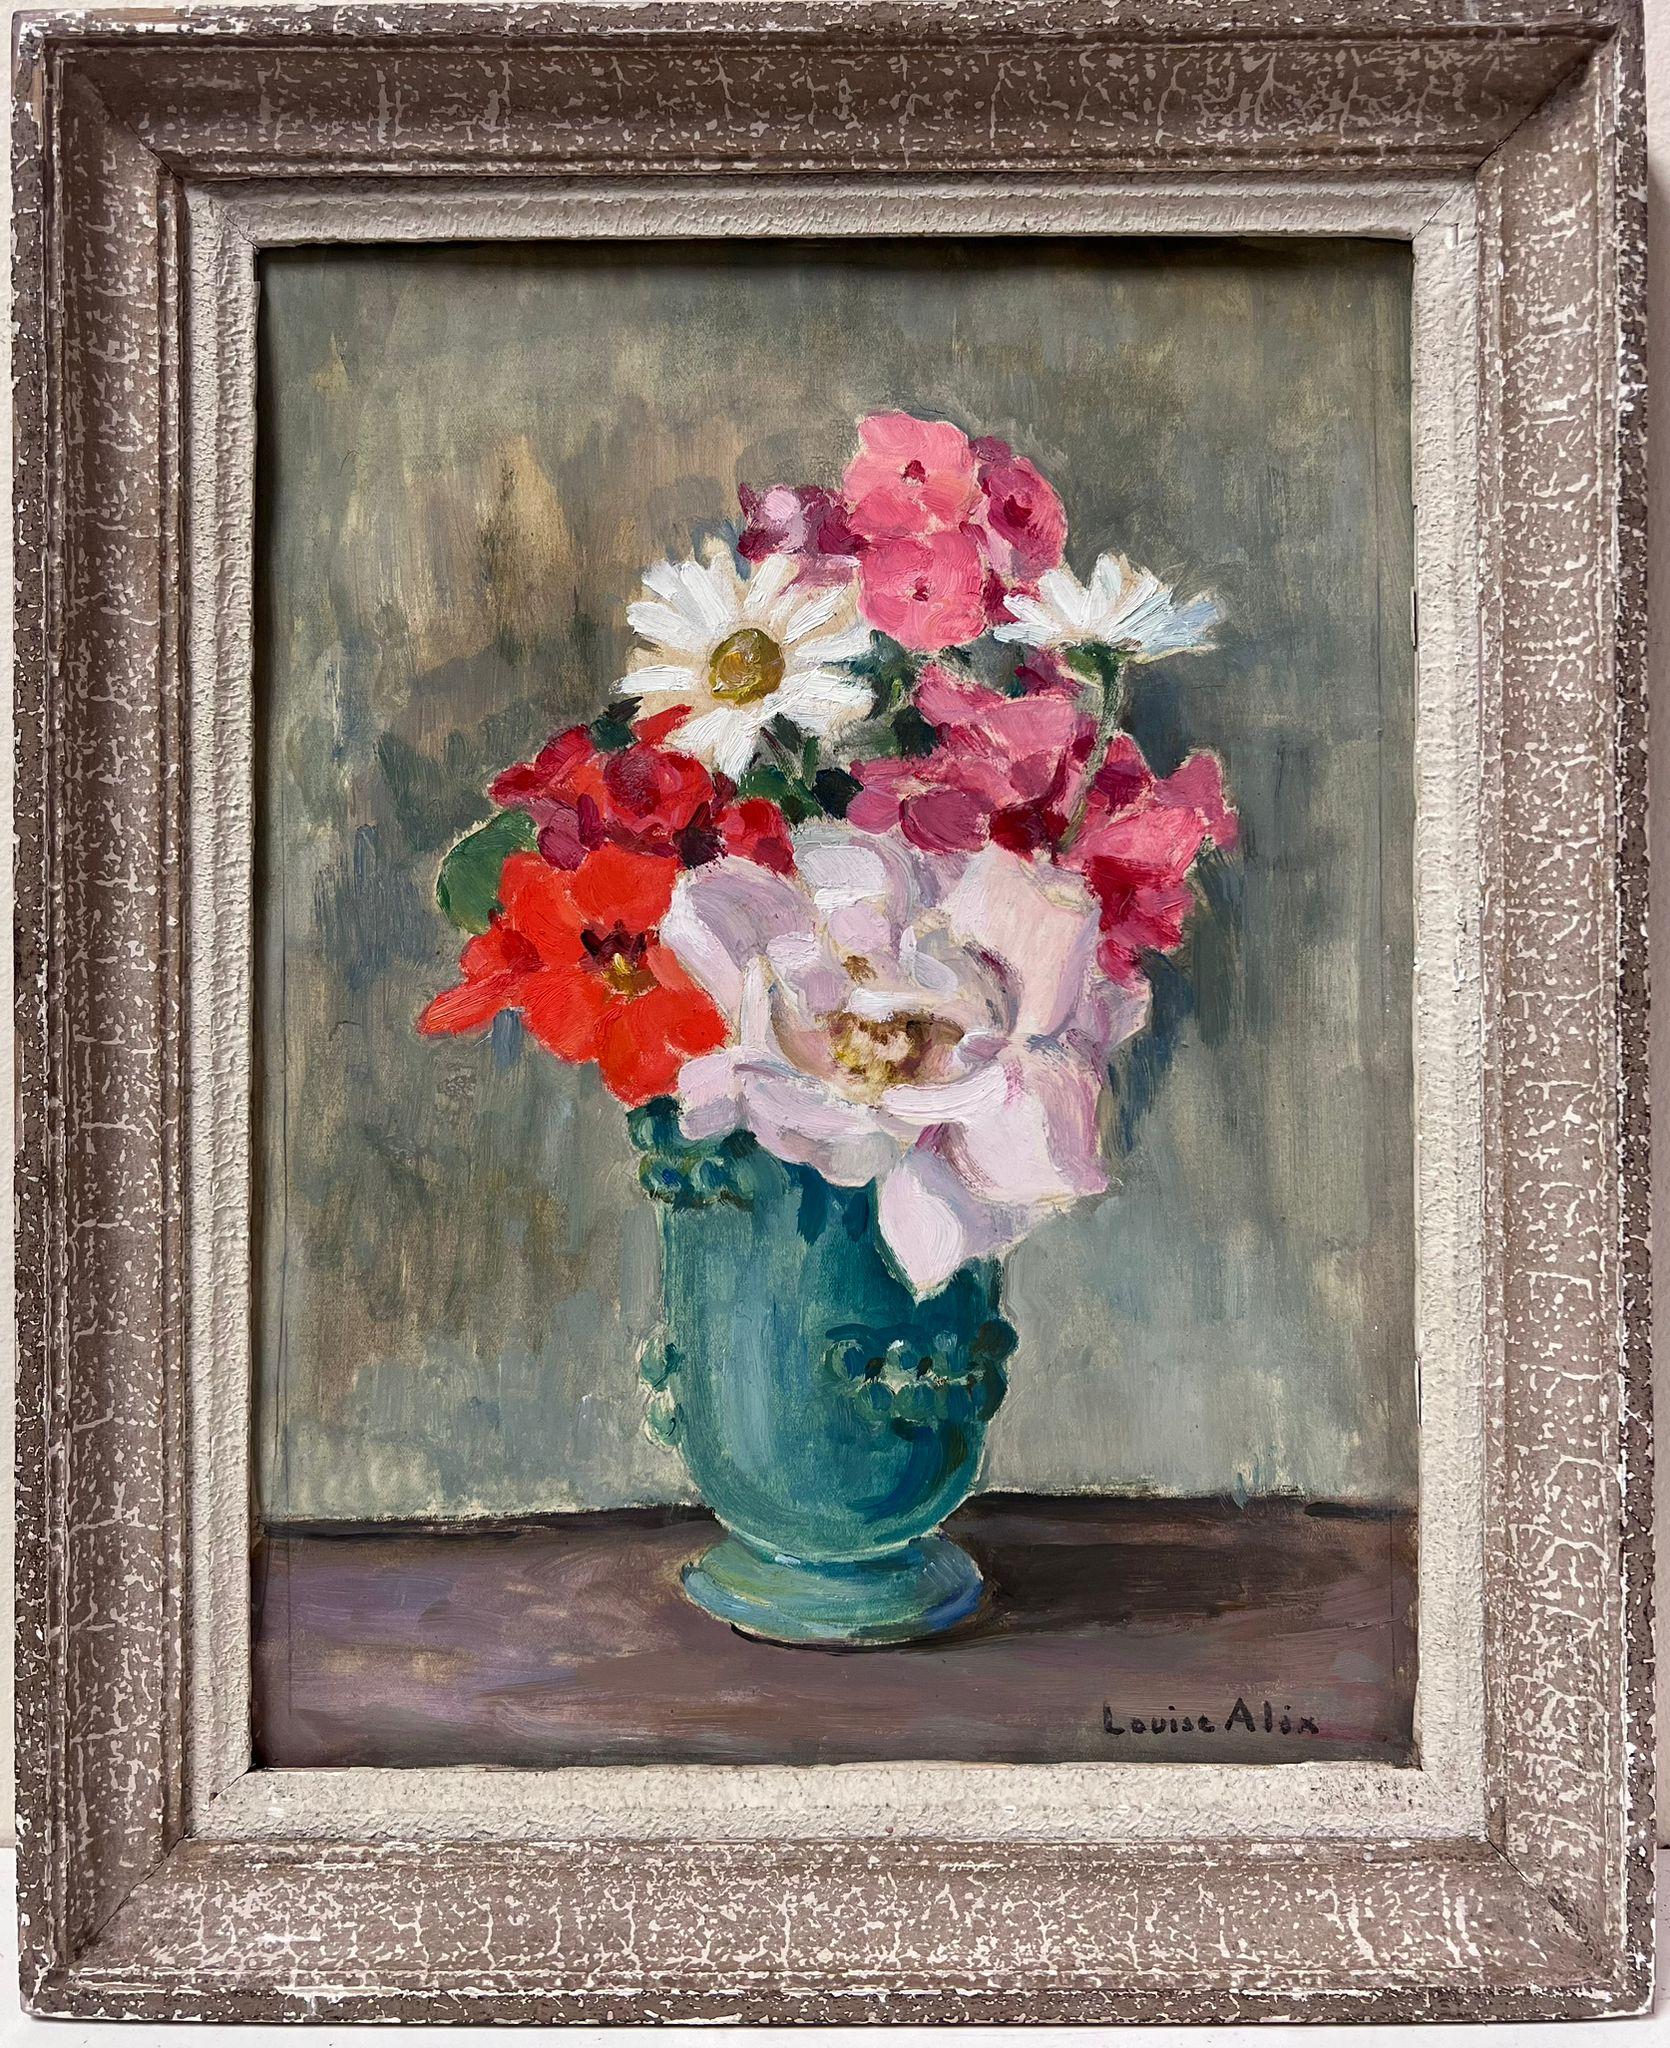 Louise Alix Still-Life Painting - Vintage French Impressionist Oil Flowers in Teal Color Vase signed original